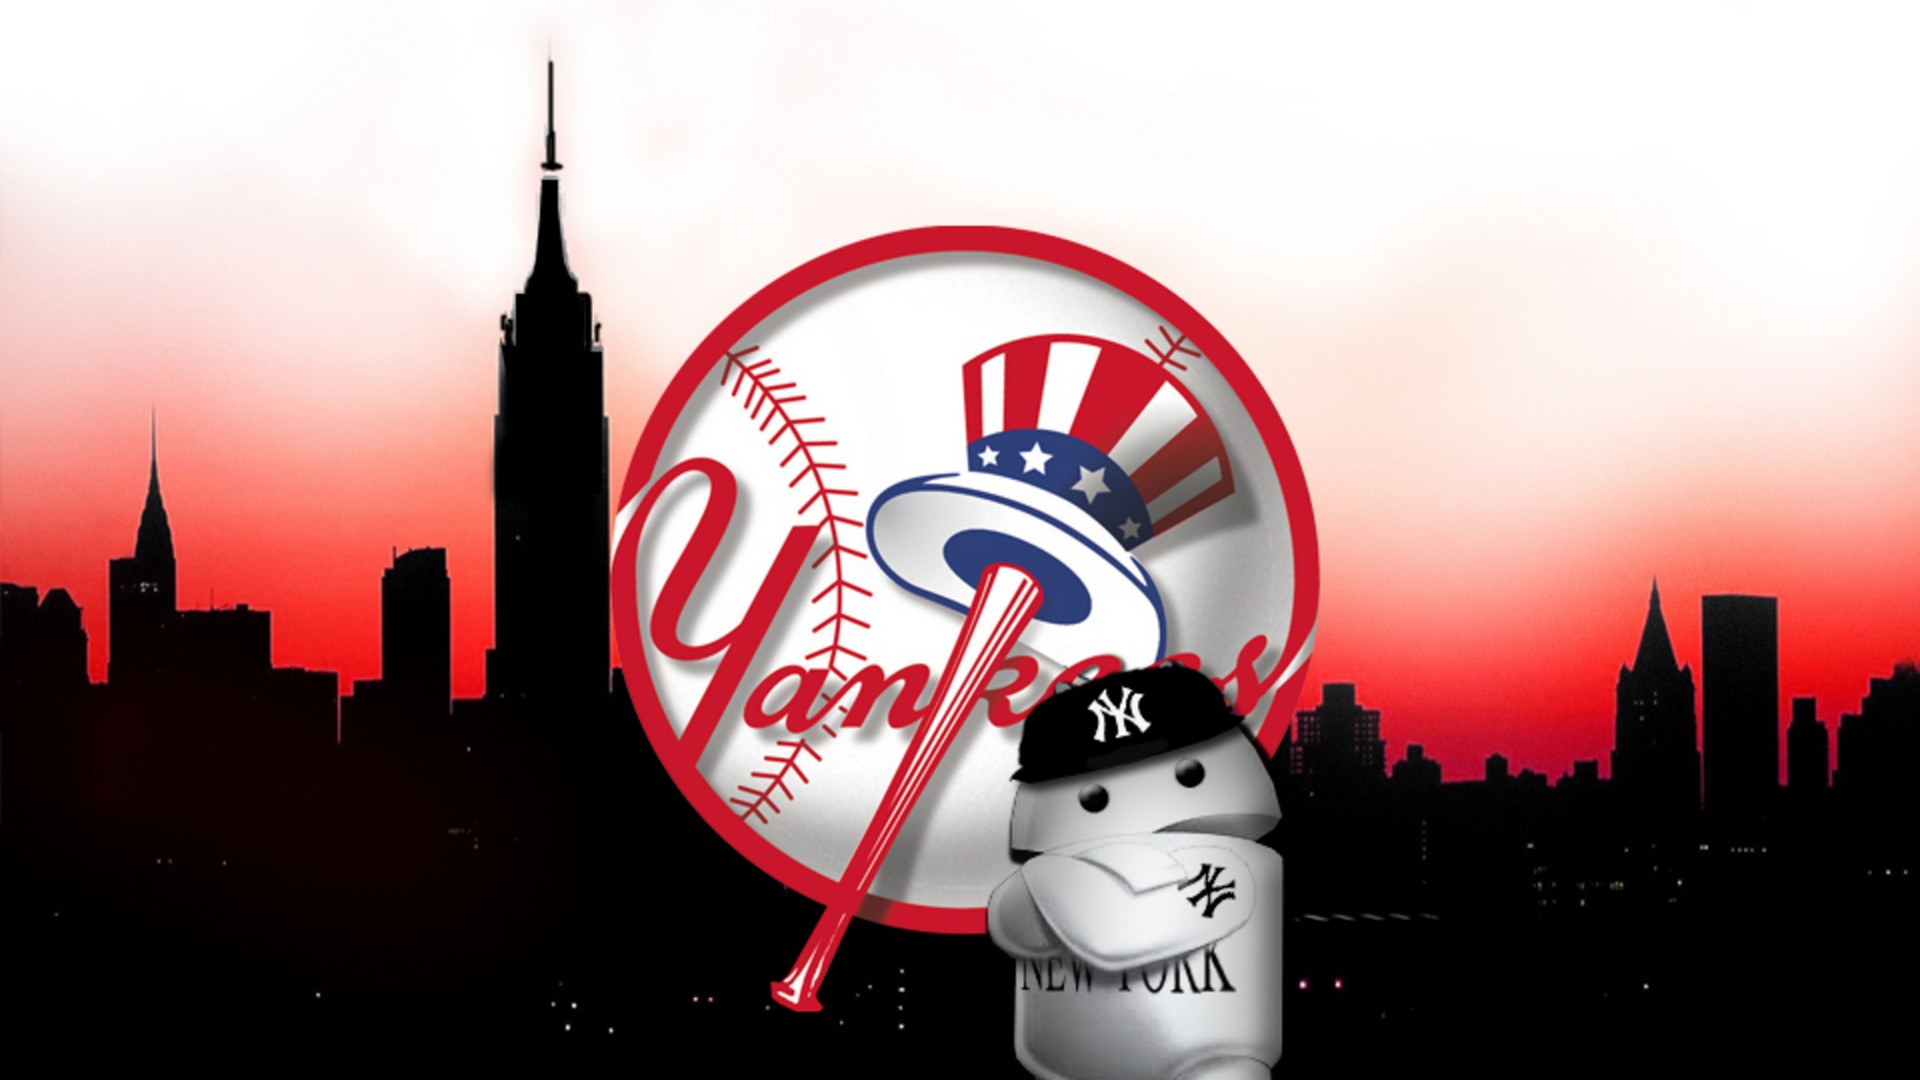 Wallpapers HD New York Yankees With high-resolution 1920X1080 pixel. You can use this wallpaper for Mac Desktop Wallpaper, Laptop Screensavers, Android Wallpapers, Tablet or iPhone Home Screen and another mobile phone device